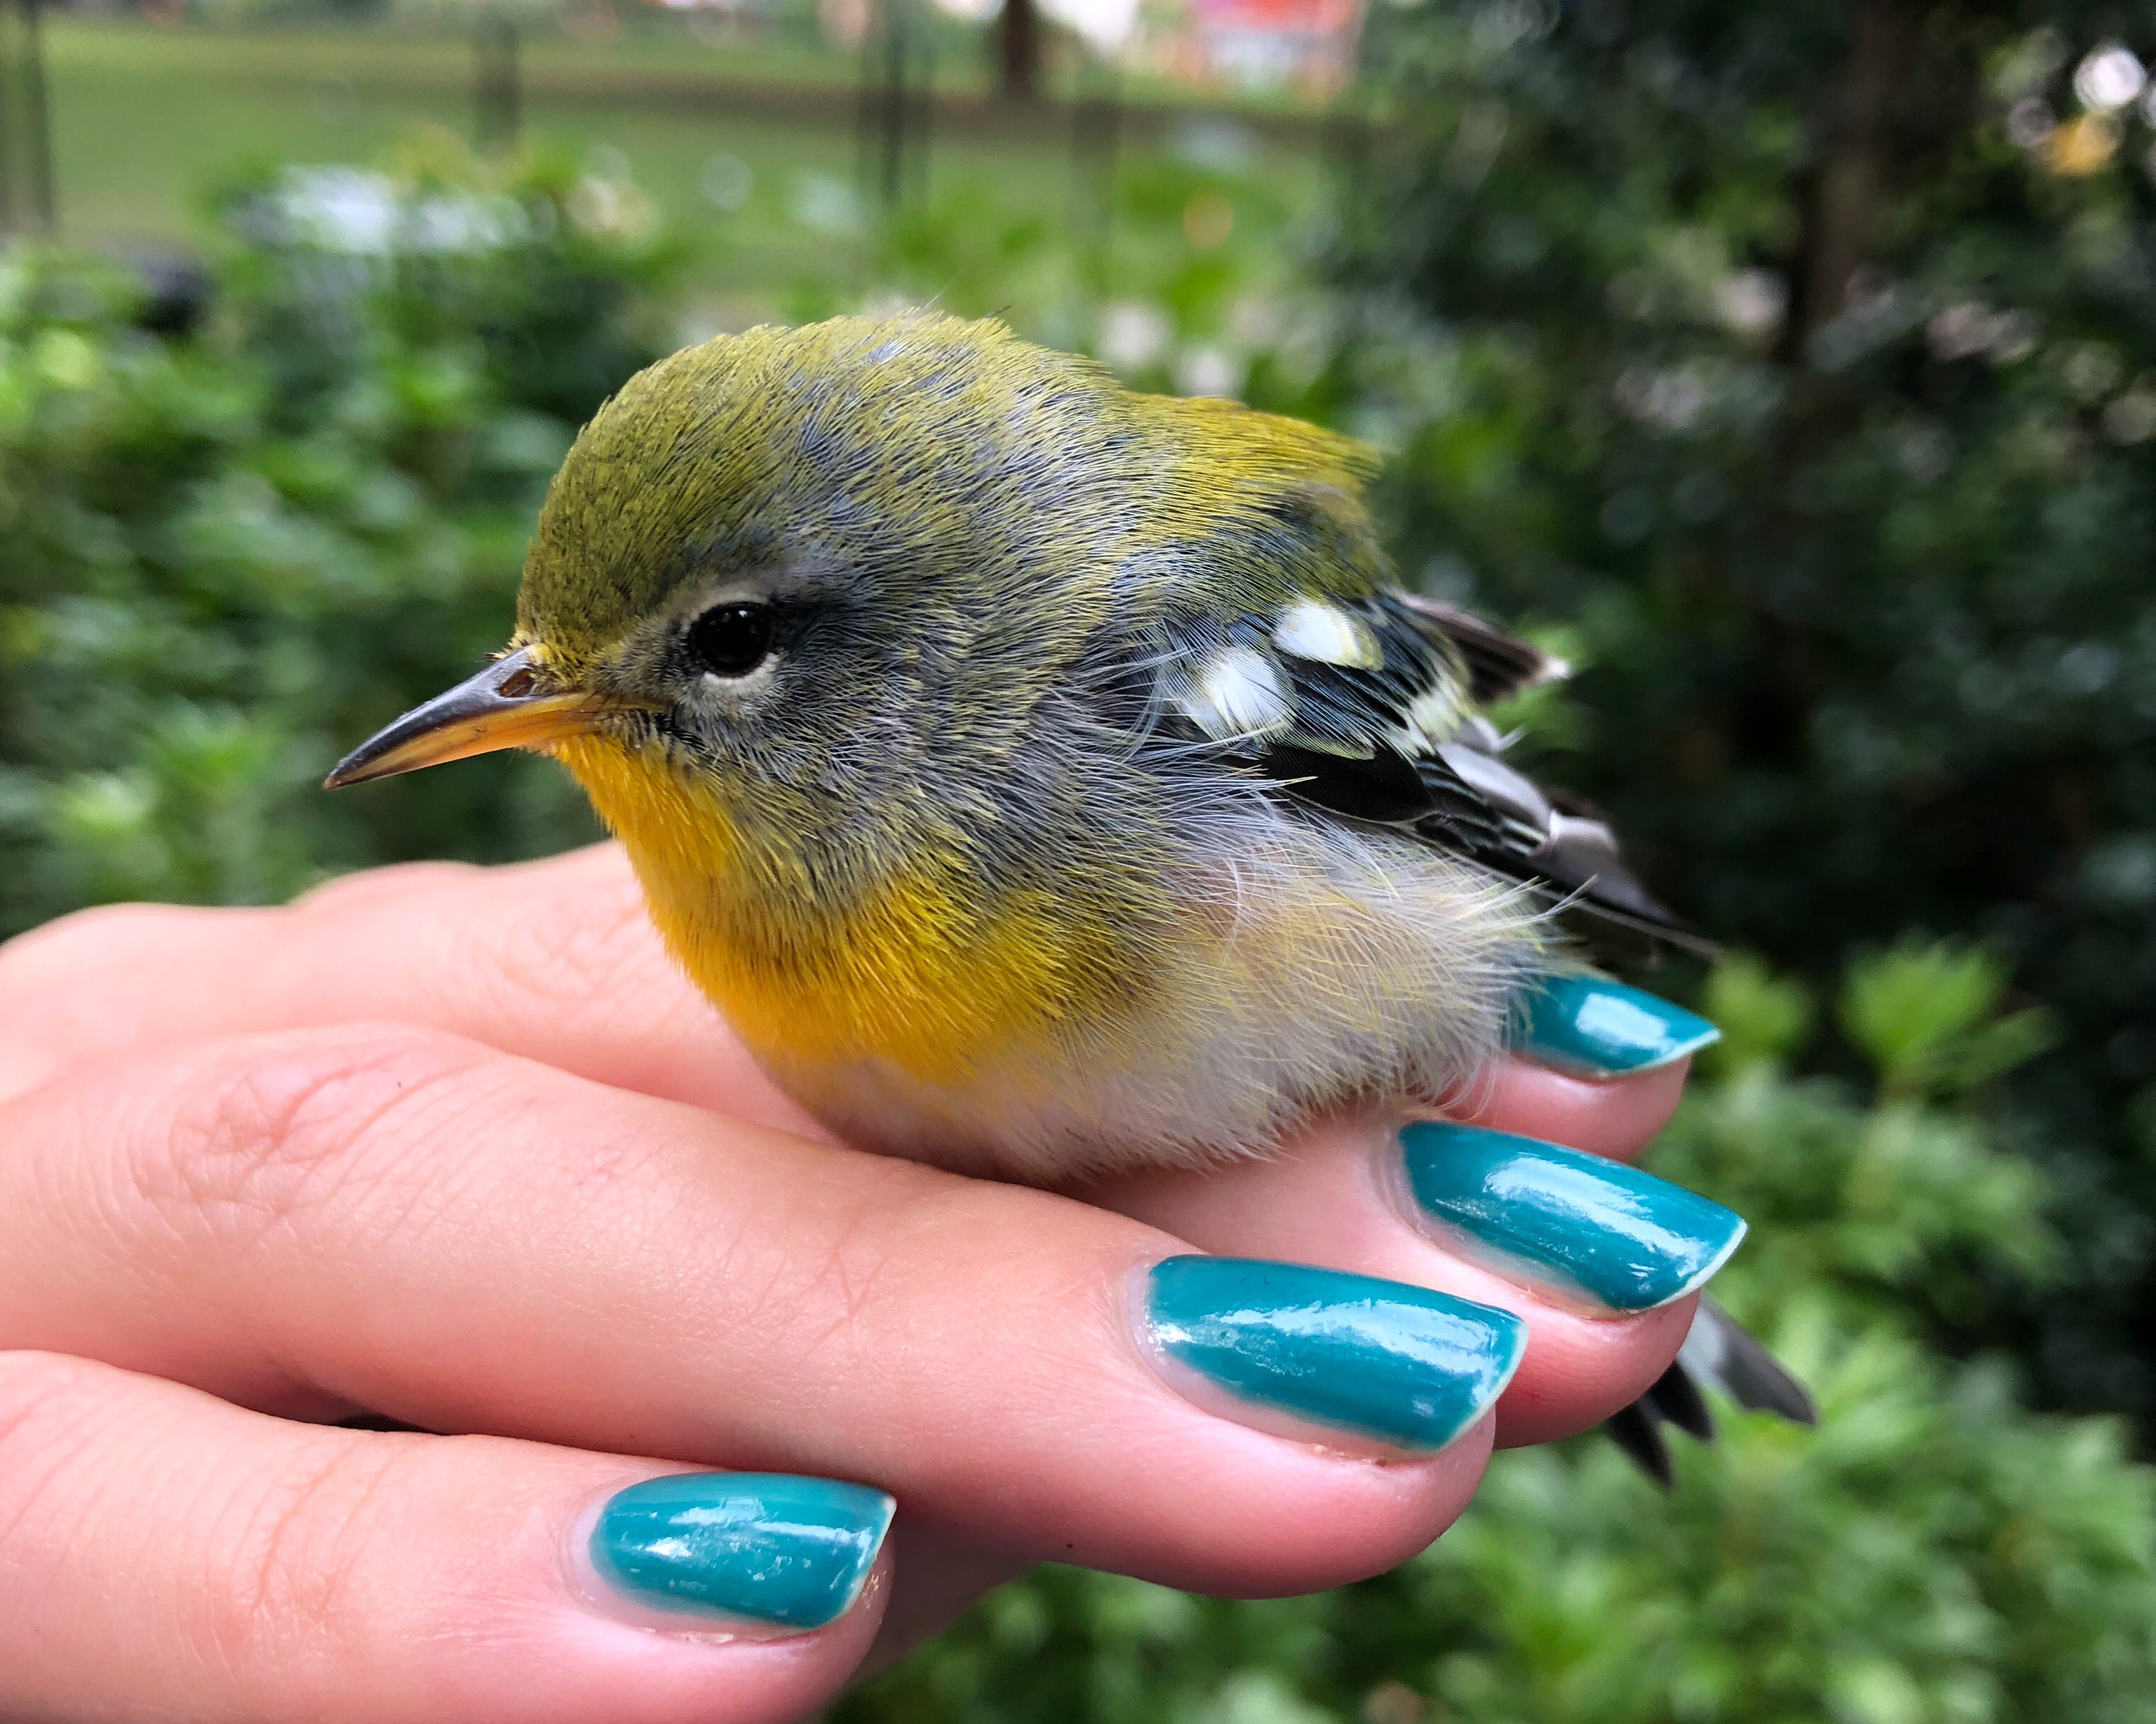 This Northern Parula was found stunned in Manhattan’s Flatiron District. Senior Conservation Biologist Kaitlyn Parkins helped it safely recover at the office before releasing it back into the wild in Madison Square Park, pictured here. Photo: NYC Bird Alliance